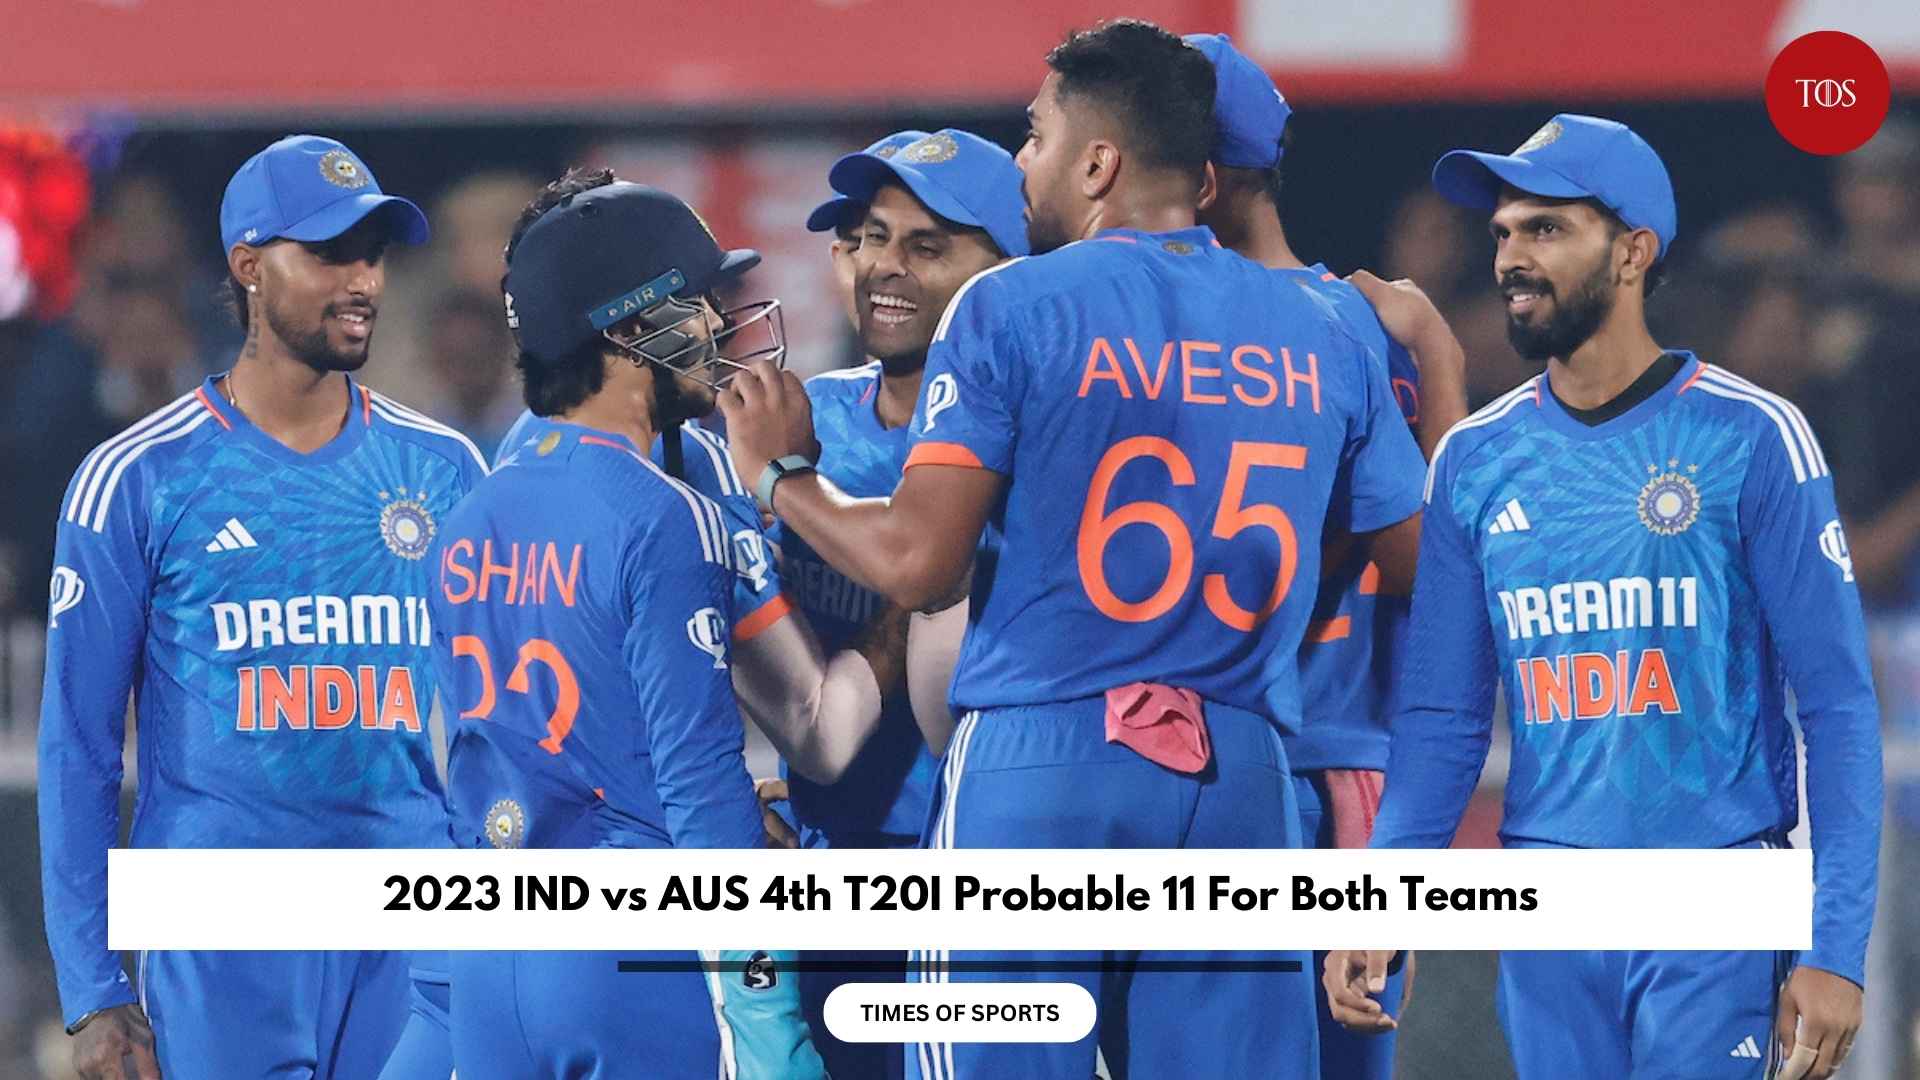 2023 IND vs AUS 4th T20I Probable 11